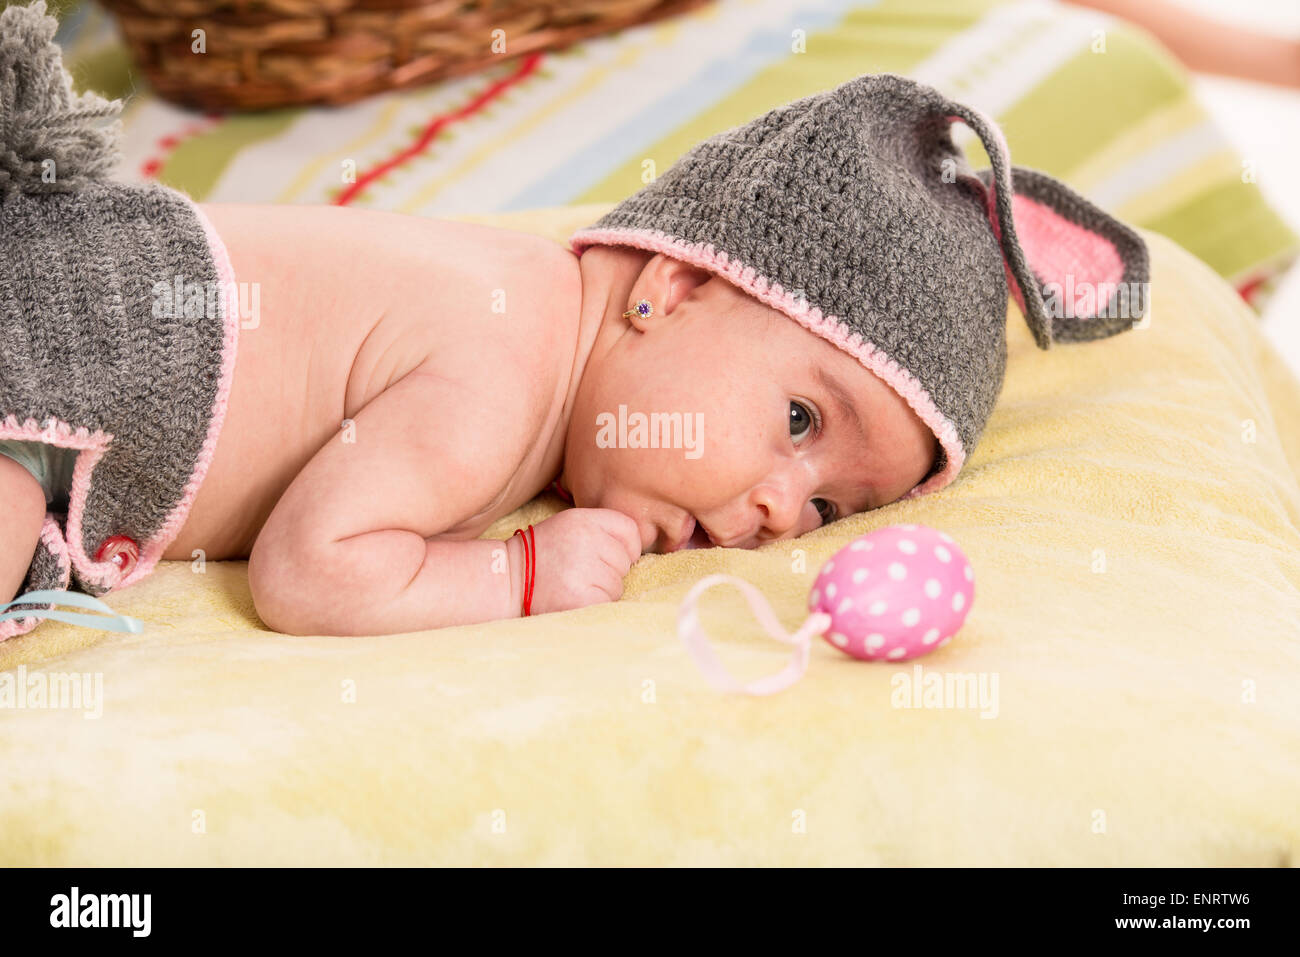 crochet bunny baby outfit